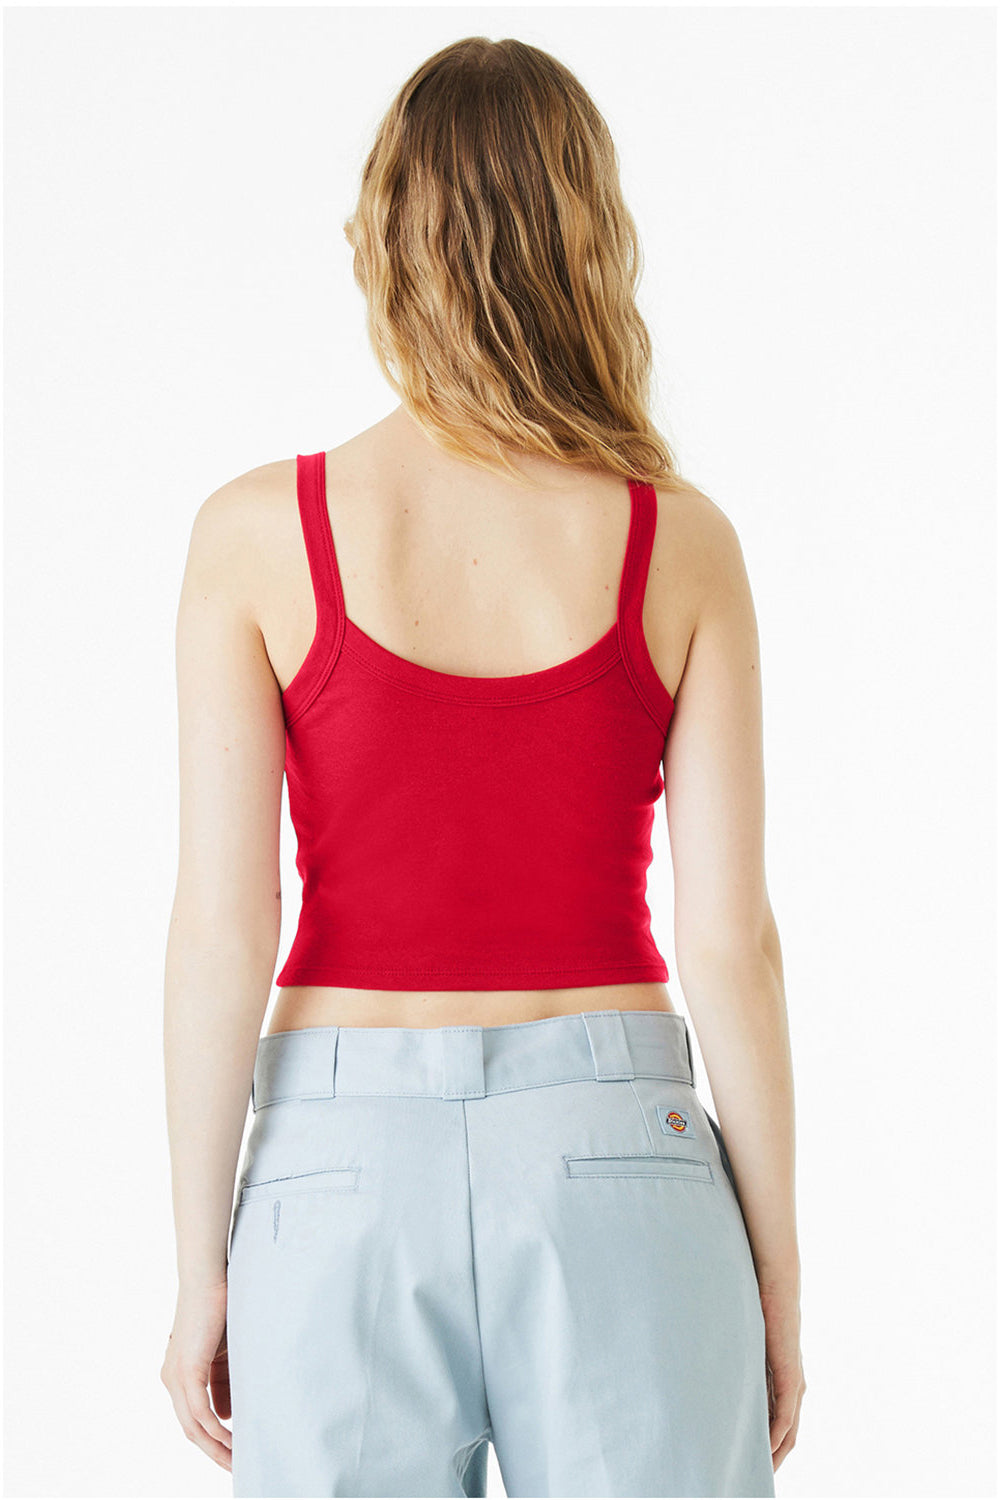 Bella + Canvas 1012BE Womens Micro Ribbed Scoop Tank Top Red Model Back